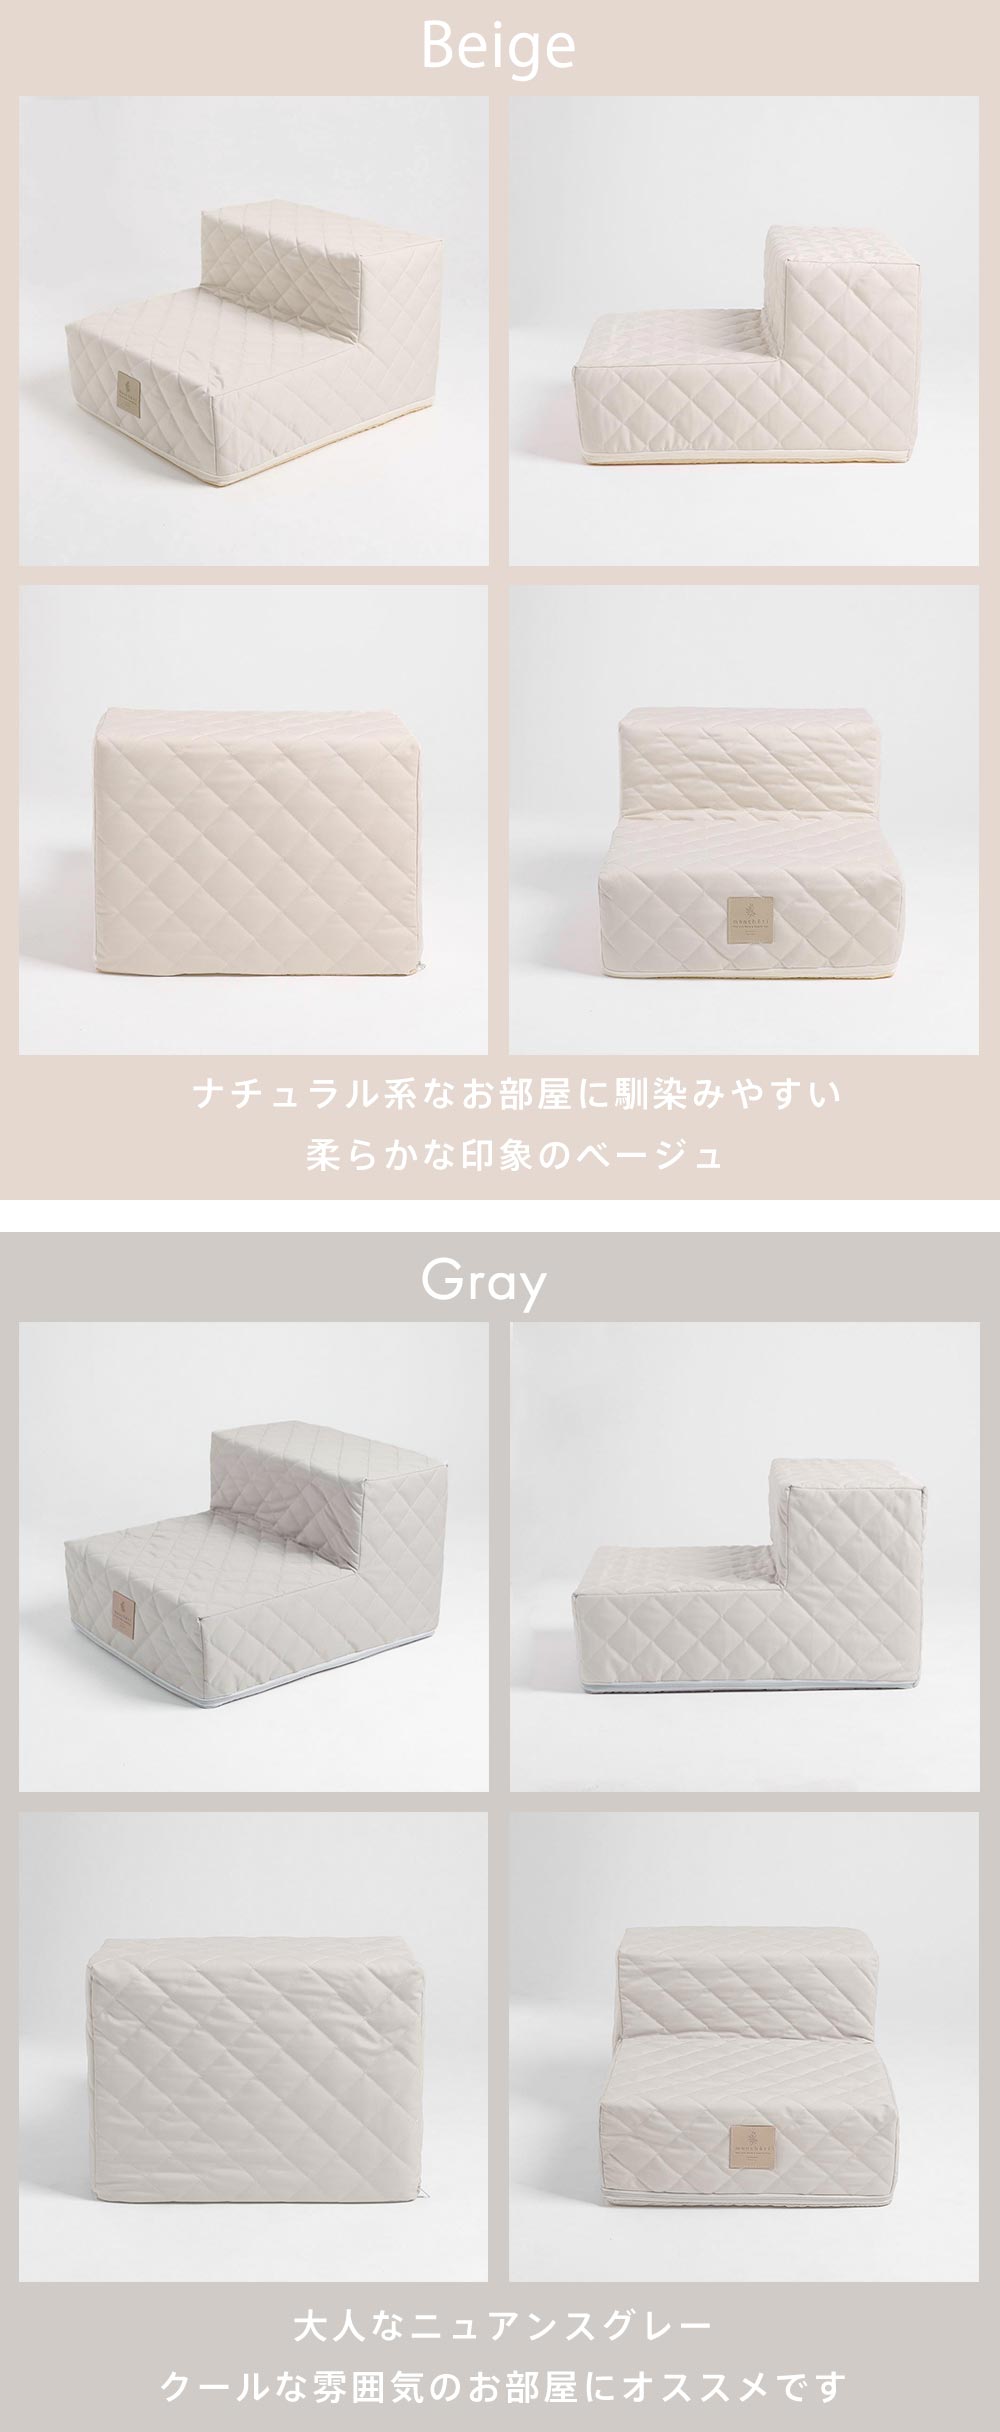 Small dog/interior/stairs/cushion/senior dog/Puppy/color variation/beige/gray